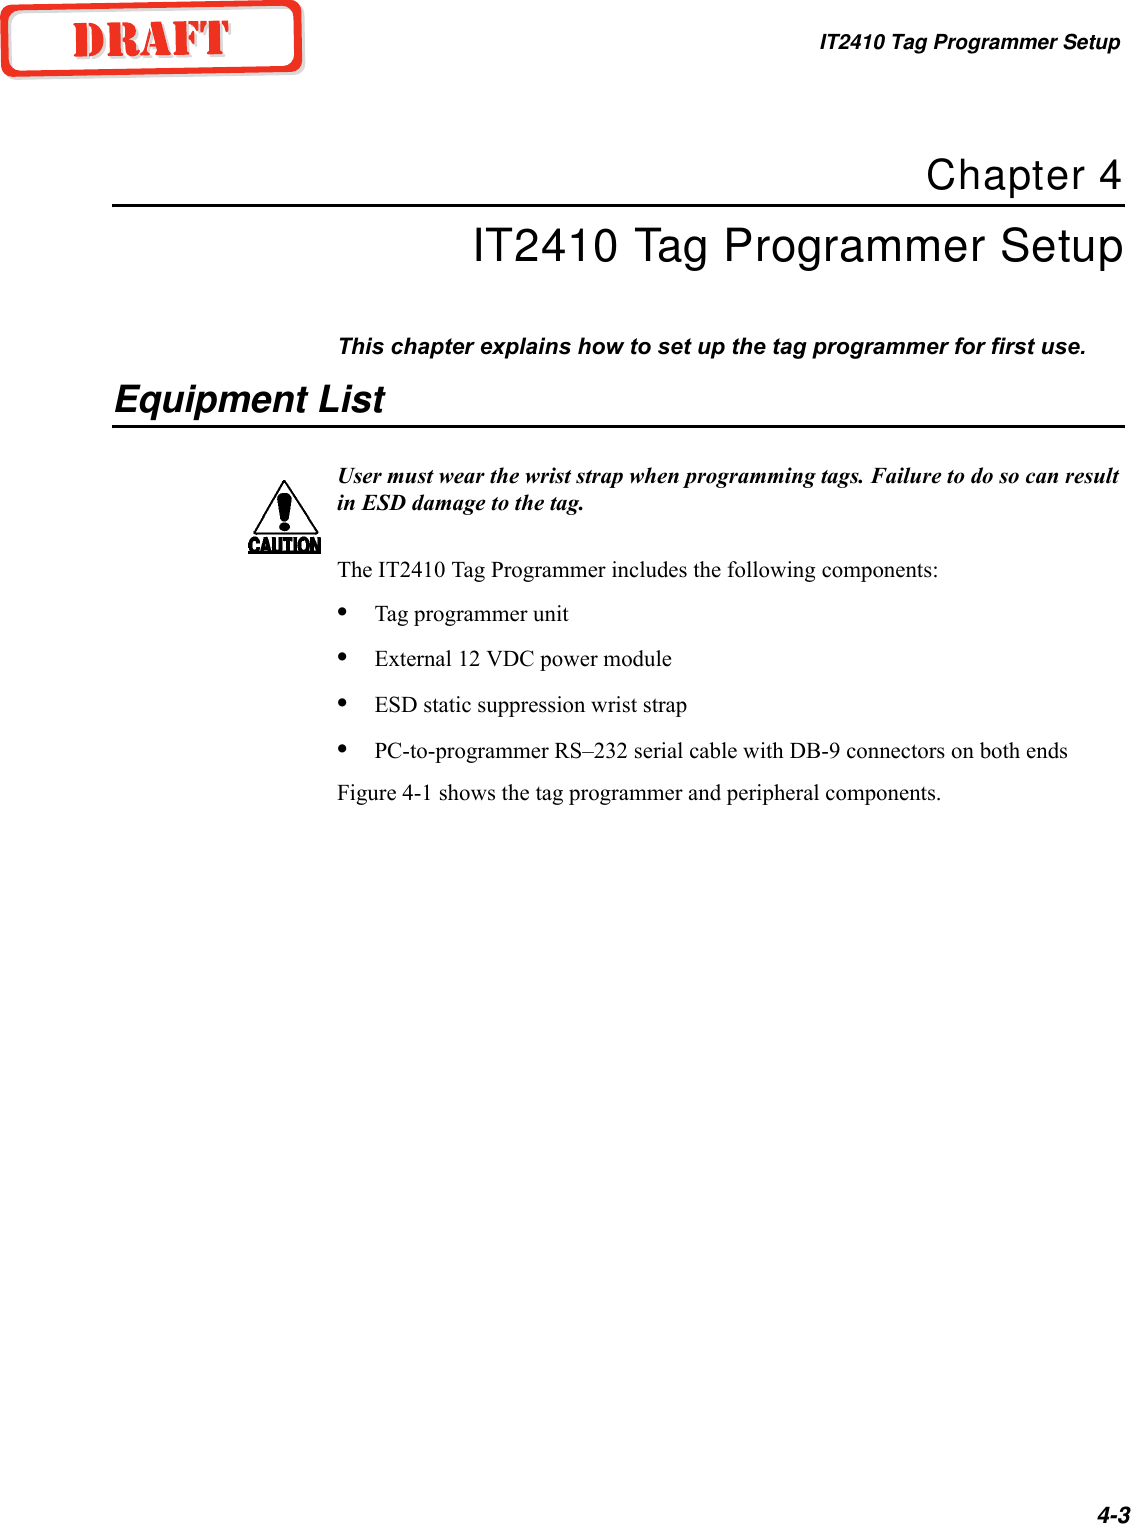 IT2410 Tag Programmer Setup4-3Chapter 4IT2410 Tag Programmer SetupThis chapter explains how to set up the tag programmer for first use.Equipment ListUser must wear the wrist strap when programming tags. Failure to do so can result in ESD damage to the tag.The IT2410 Tag Programmer includes the following components:•Tag programmer unit•External 12 VDC power module•ESD static suppression wrist strap•PC-to-programmer RS–232 serial cable with DB-9 connectors on both endsFigure 4-1 shows the tag programmer and peripheral components.